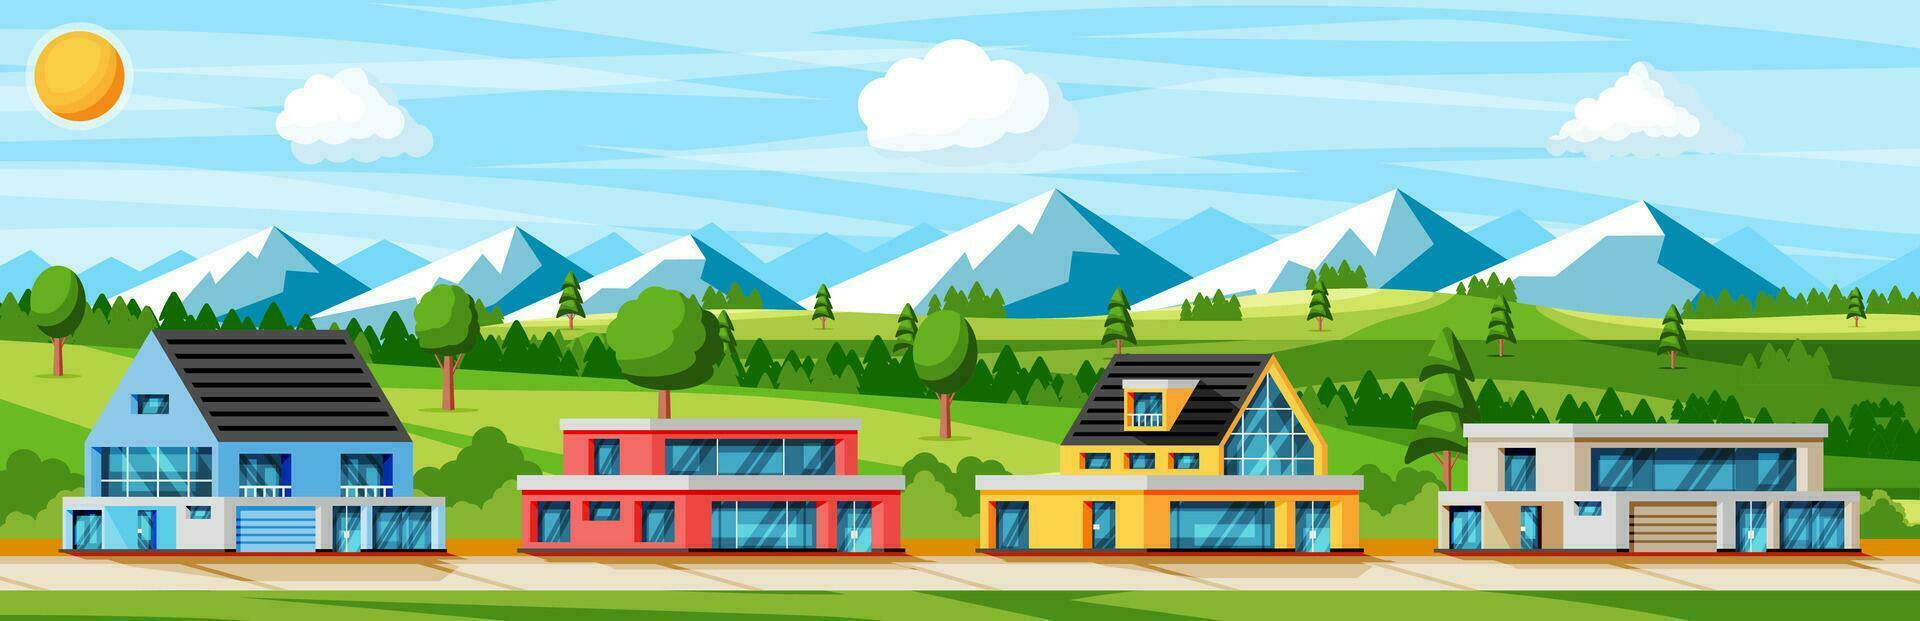 Landscape with Residential Cottage or Countryside Building Exterior. Facade with Trees and Garden Front Yard. Modern Suburban House in Mountains. Real Estate Concept. Cartoon Flat Vector Illustration